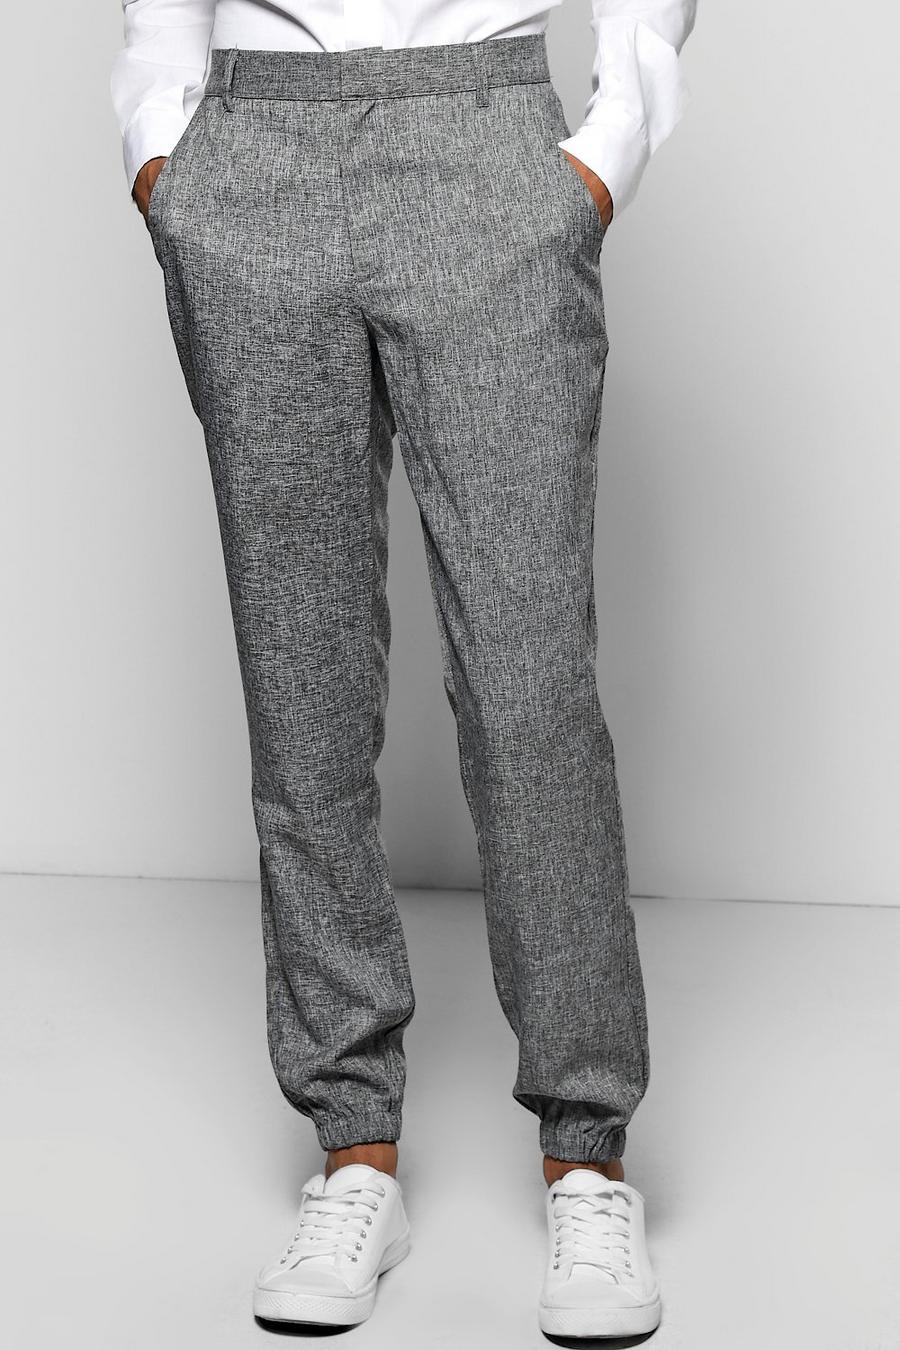 Smart Cuffed Trouser, Charcoal gris image number 1